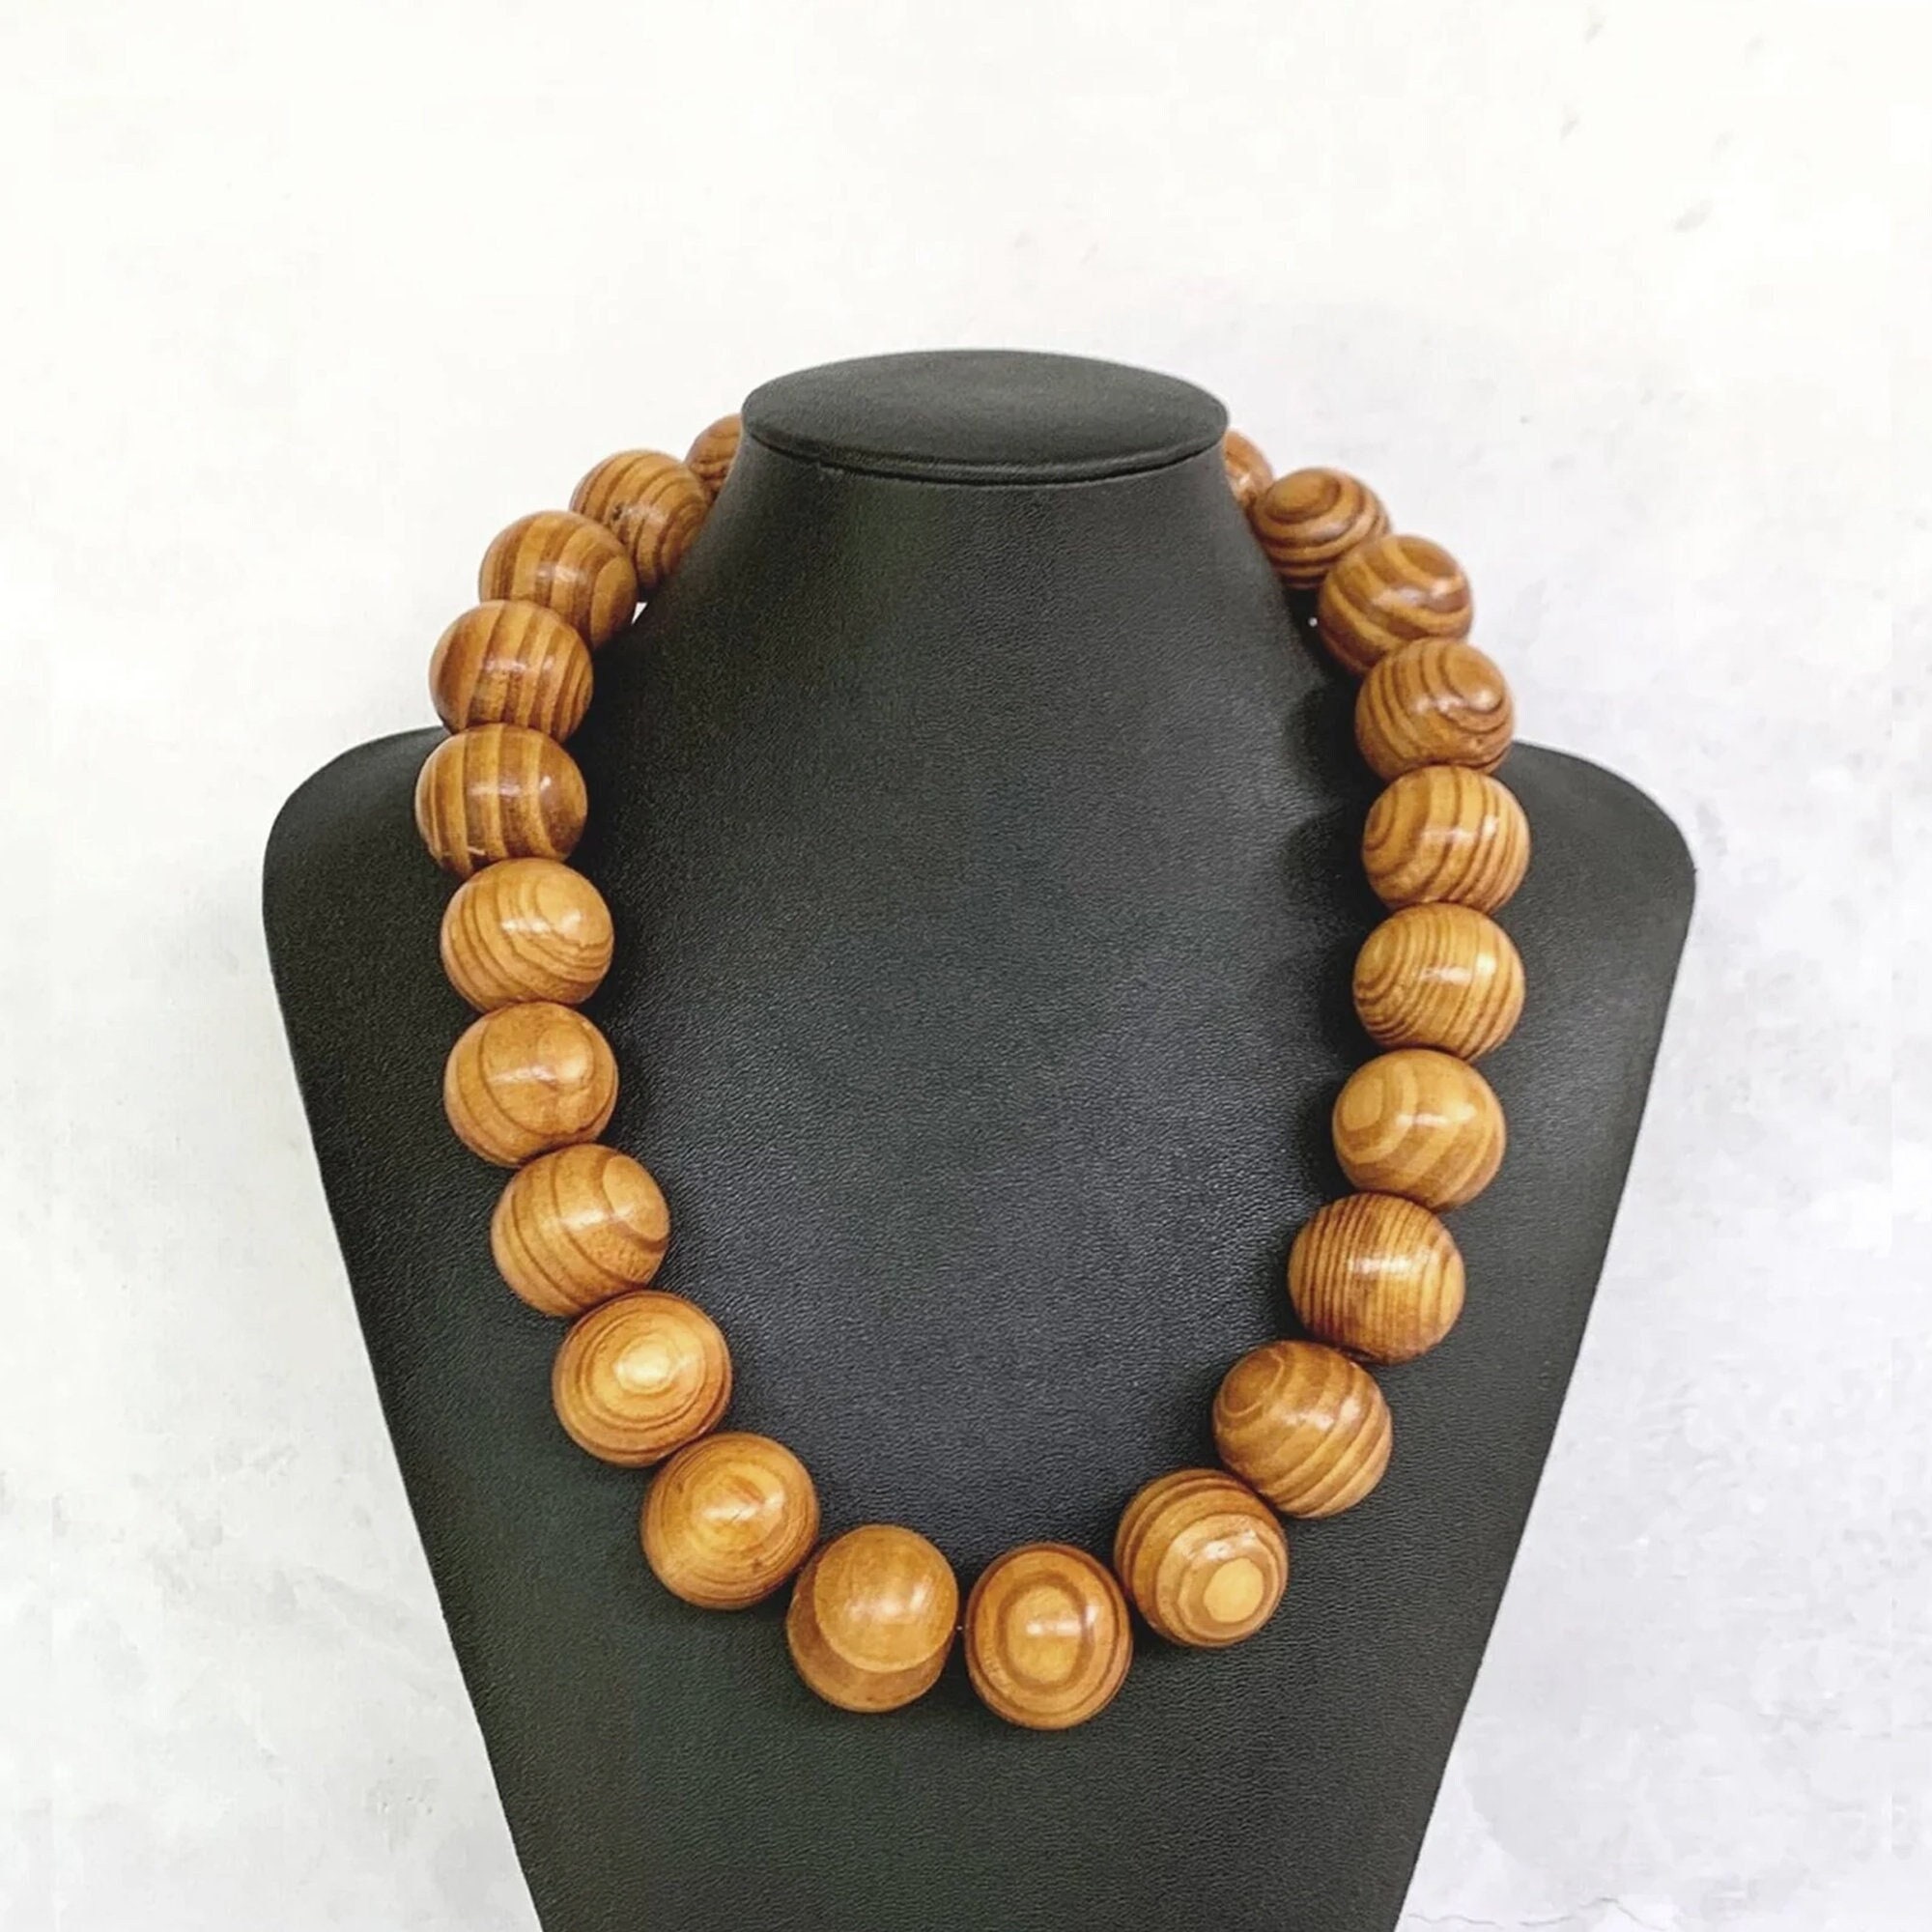 17 Useful and Pretty DIY Ideas for Necklace - Pretty Designs | Wooden bead  necklaces, Wood bead necklace, Wood beads jewelry